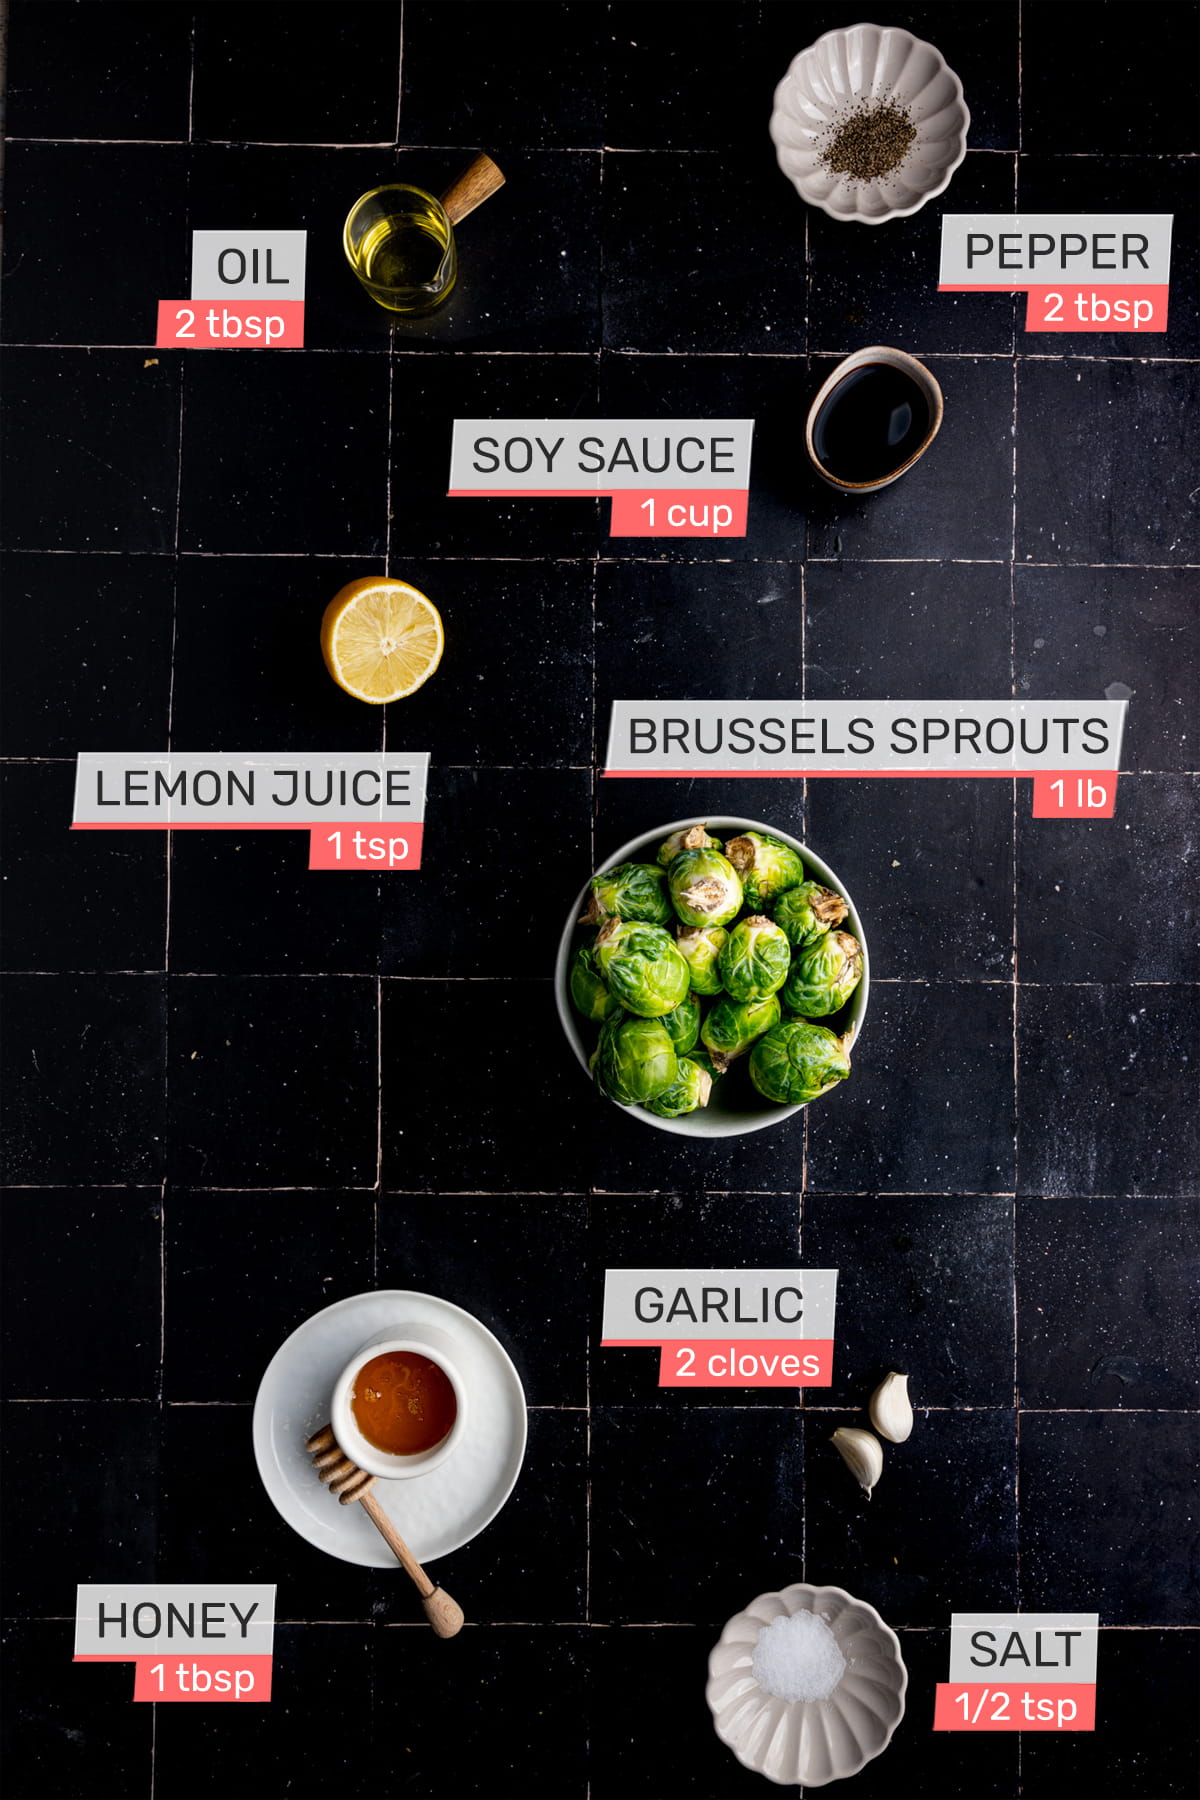 Overhead view of all ingredients sweet and salty brussels sprouts - oil, pepper, soy sauce, lemon juice, brussels sprouts, garlic, honey, salt